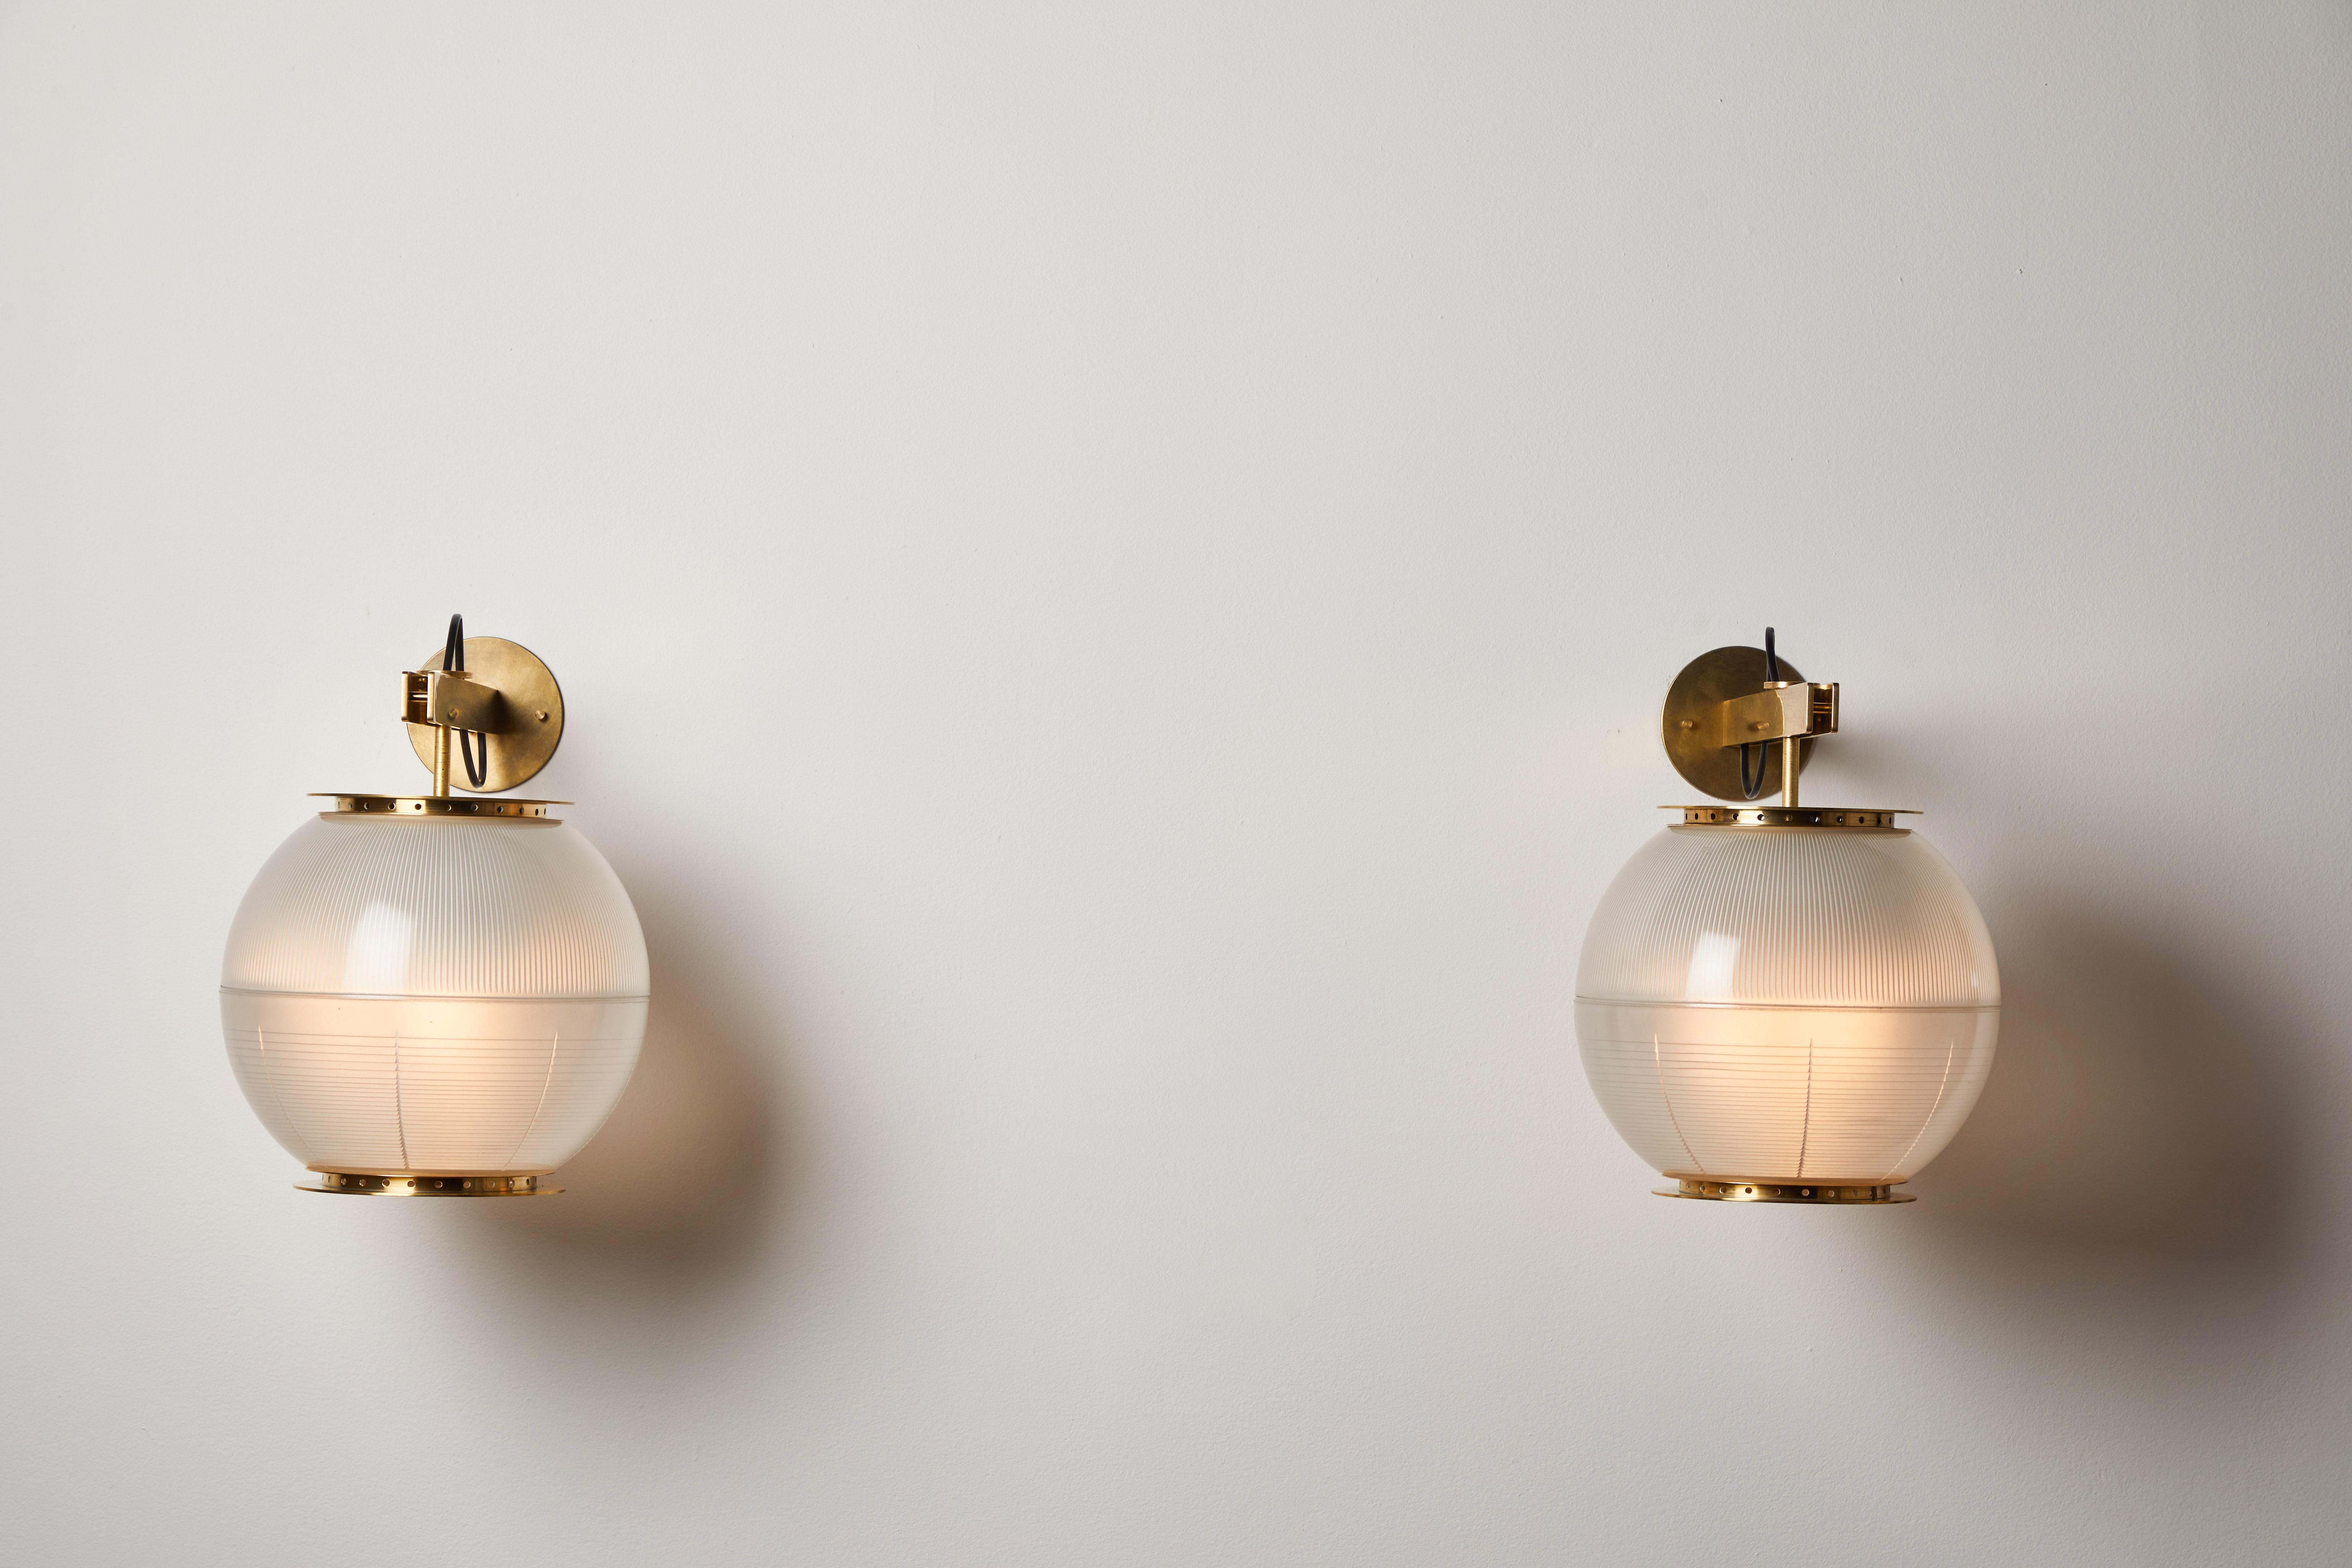 Pair of Model Lp7 Sconces by Ignazio Gardella for Azucena. Designed and manufactured in Italy, circa 1950s. Brass and holophane glass. Rewired for U.S. standards. Original backplates. Retains original manufacturer's mark. We recommend three E27 60w